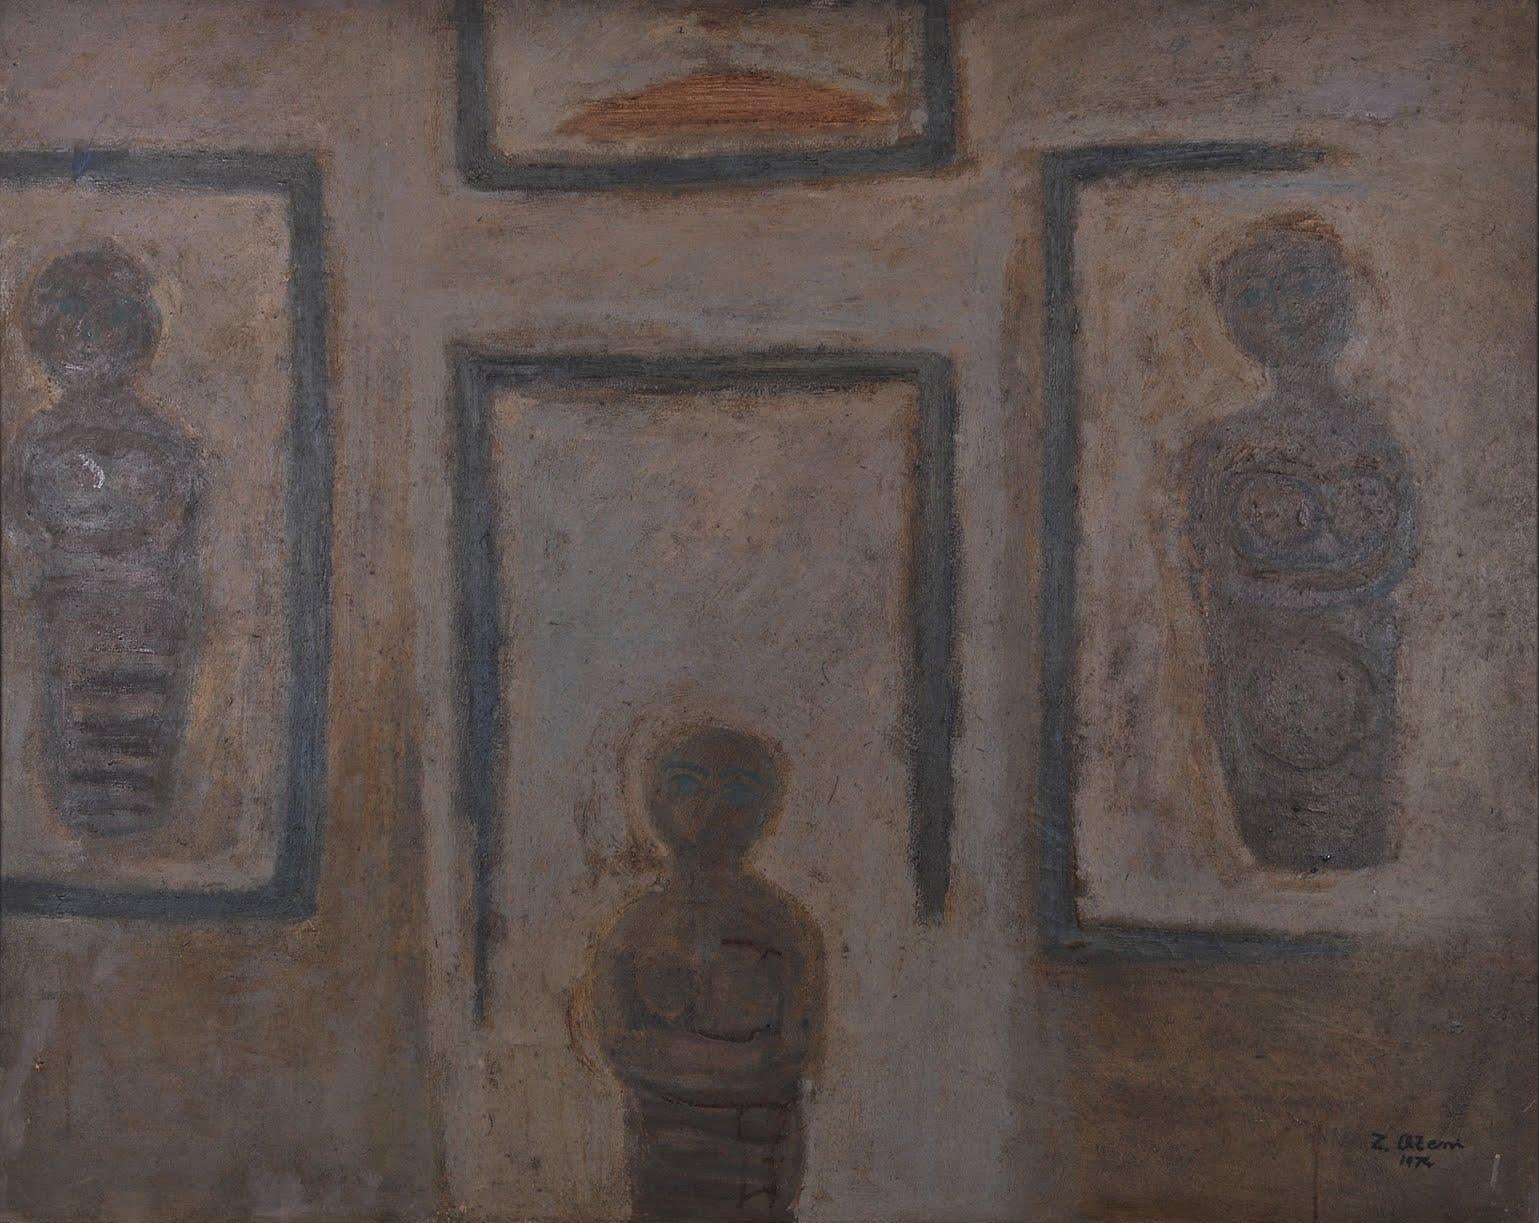 "Seclusion I" Abstract Oil Painting 31.5" x 39" inch (1974) by Zaccaria Zeini

Medium: oil on canvas 
Signed and dated 

Zaccaria El Zeini (1932 - 1993) was raised in the popular district of Sayyida Zienab in Old Cairo and graduated from the Faculty